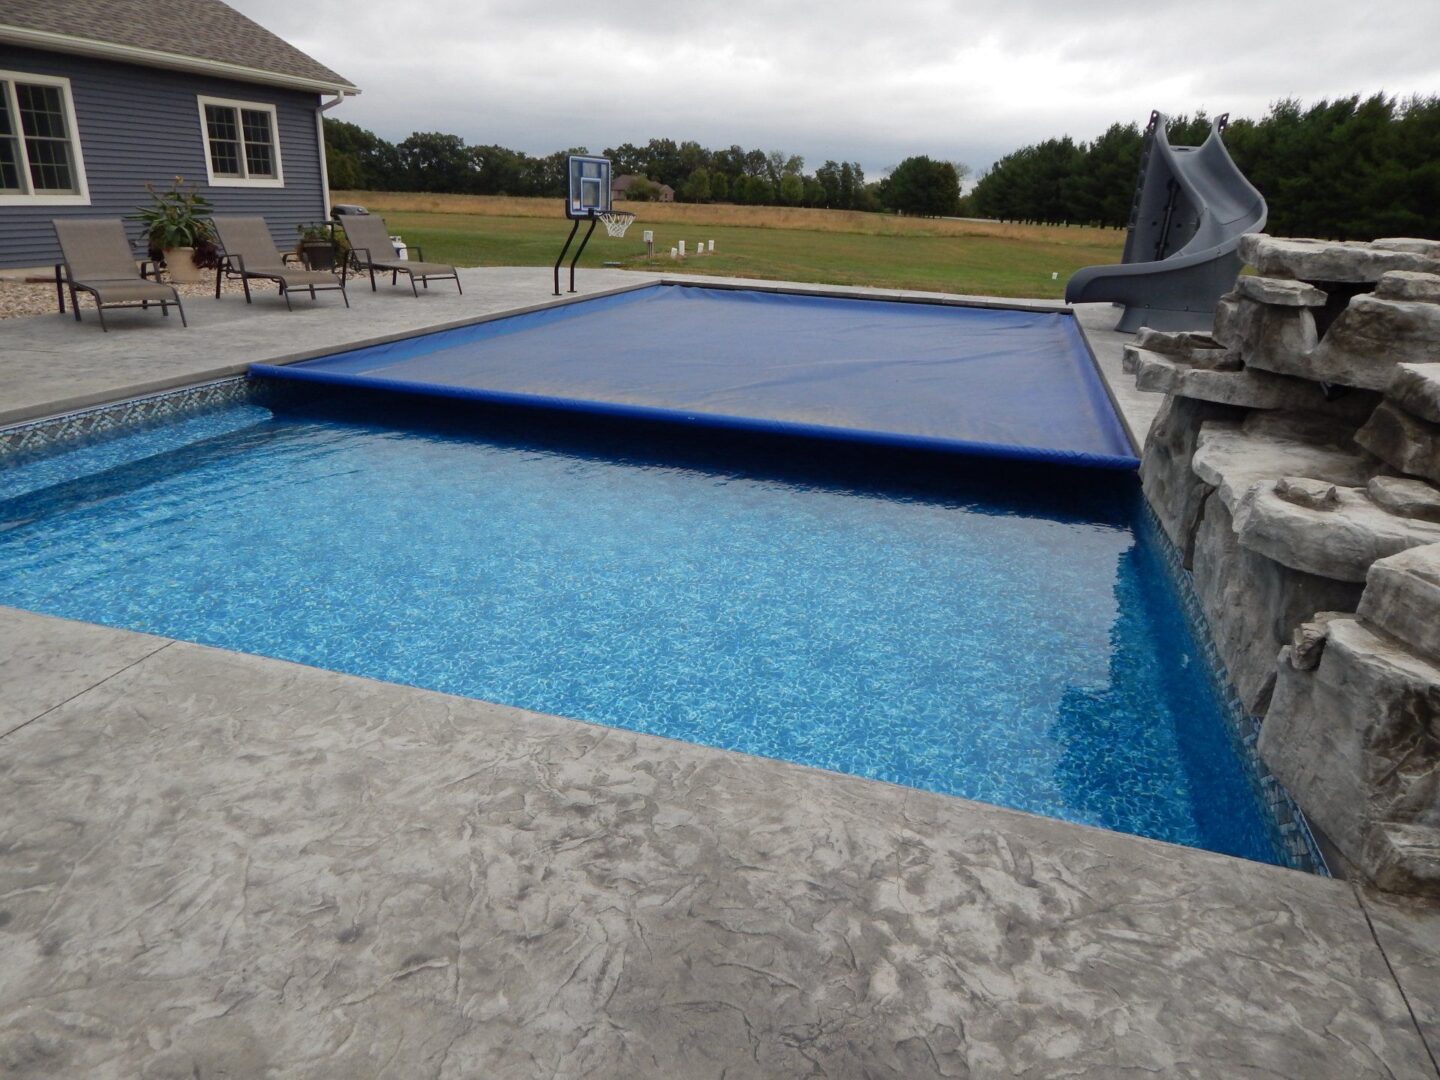 A blue cover for an inground pool